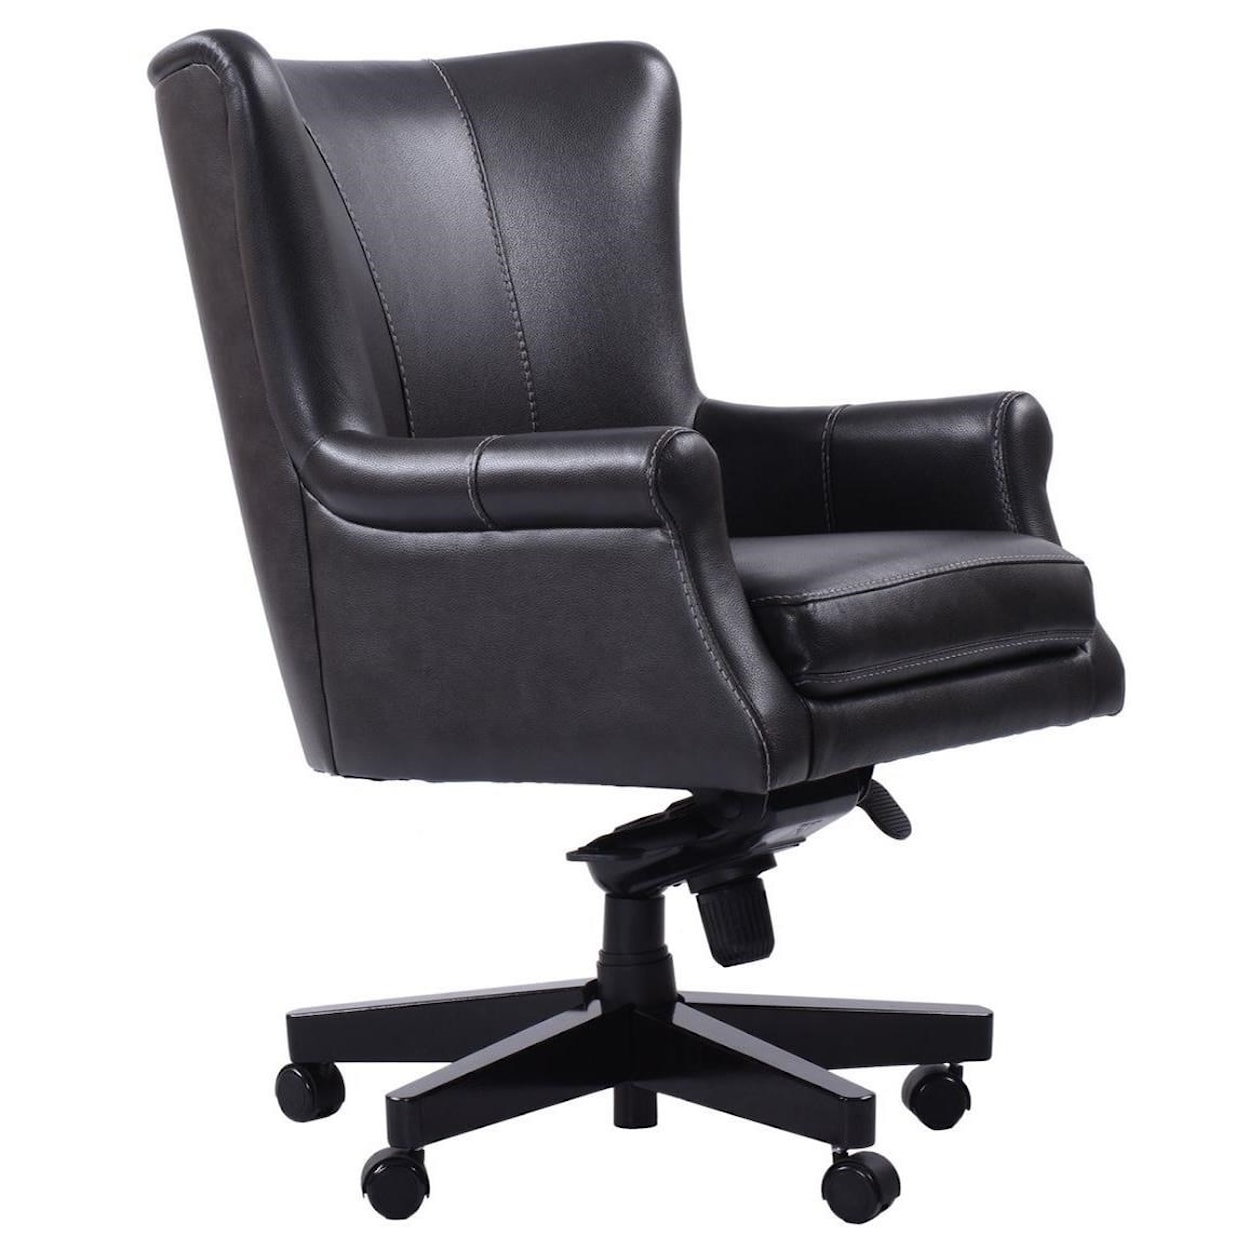 Carolina Living Desk Chairs Leather Desk Chair